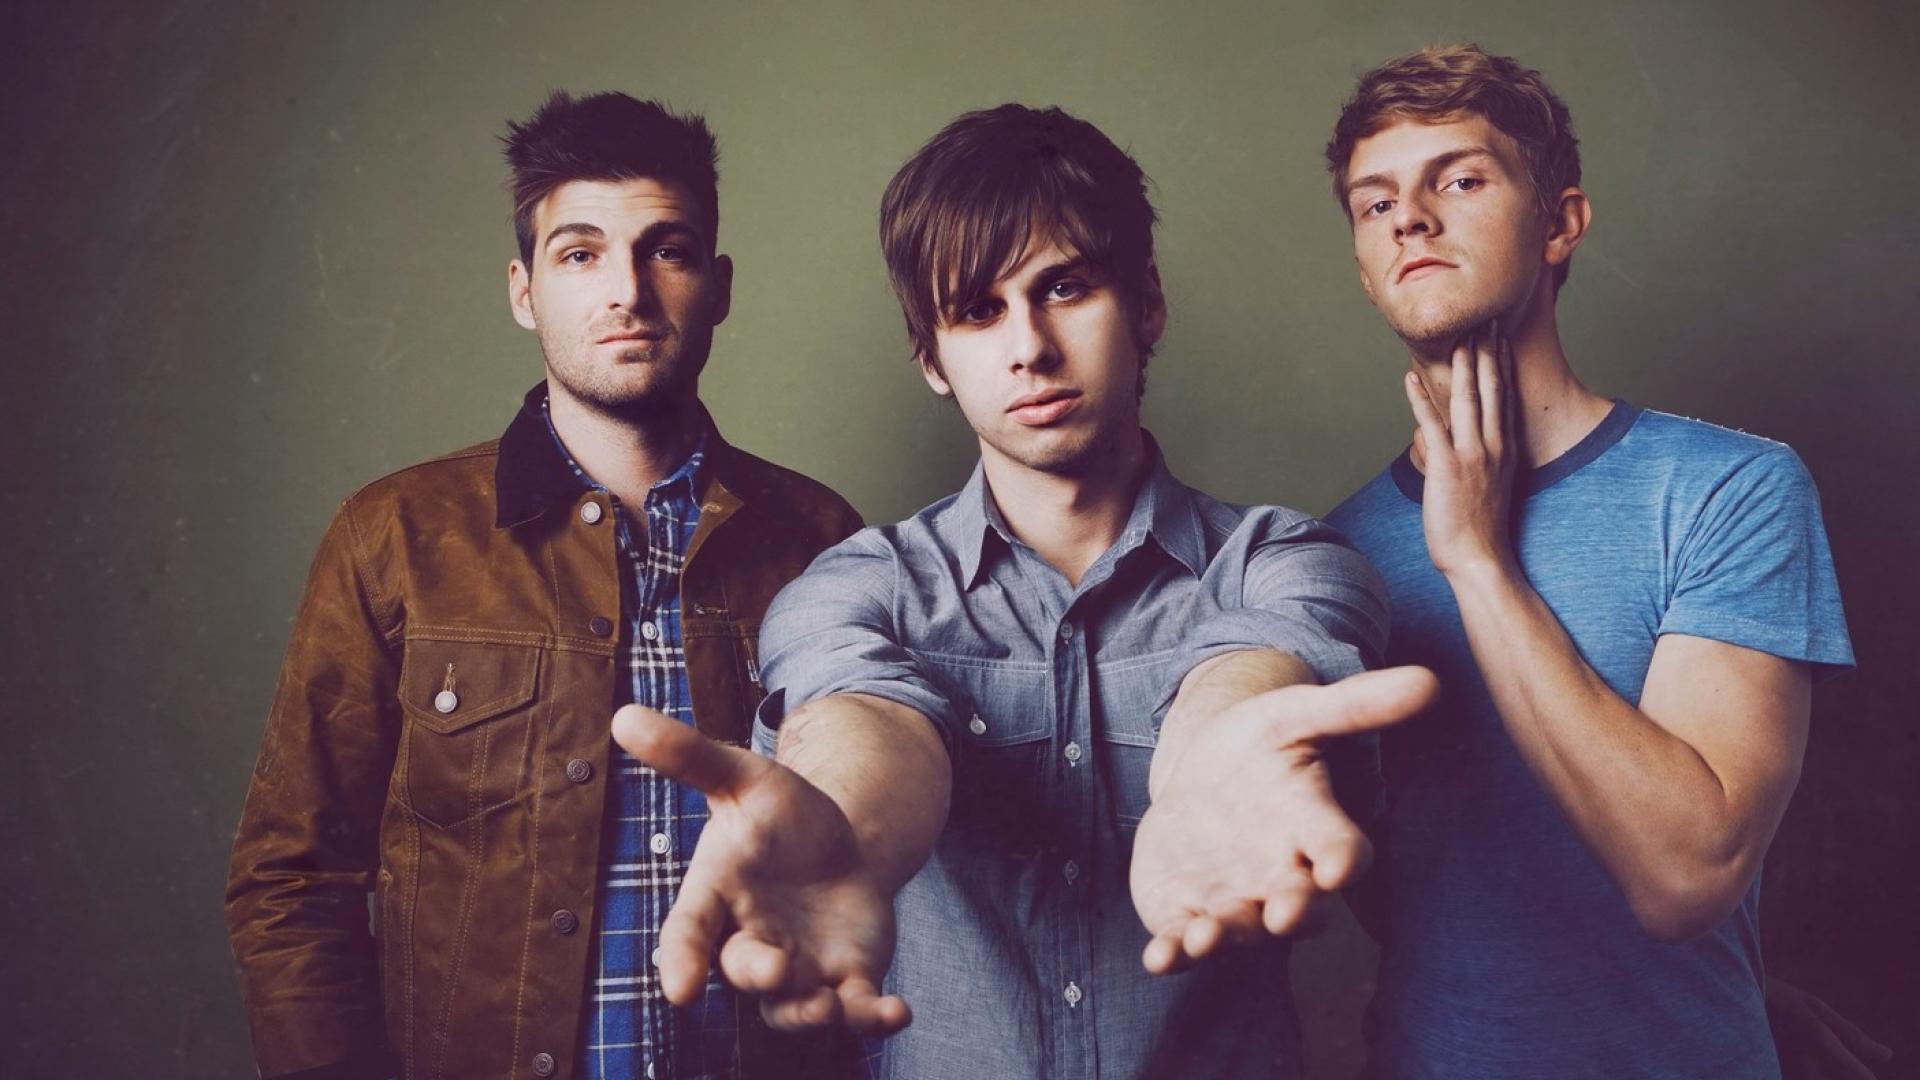 Awesome face pop punk foster the people wallpaper